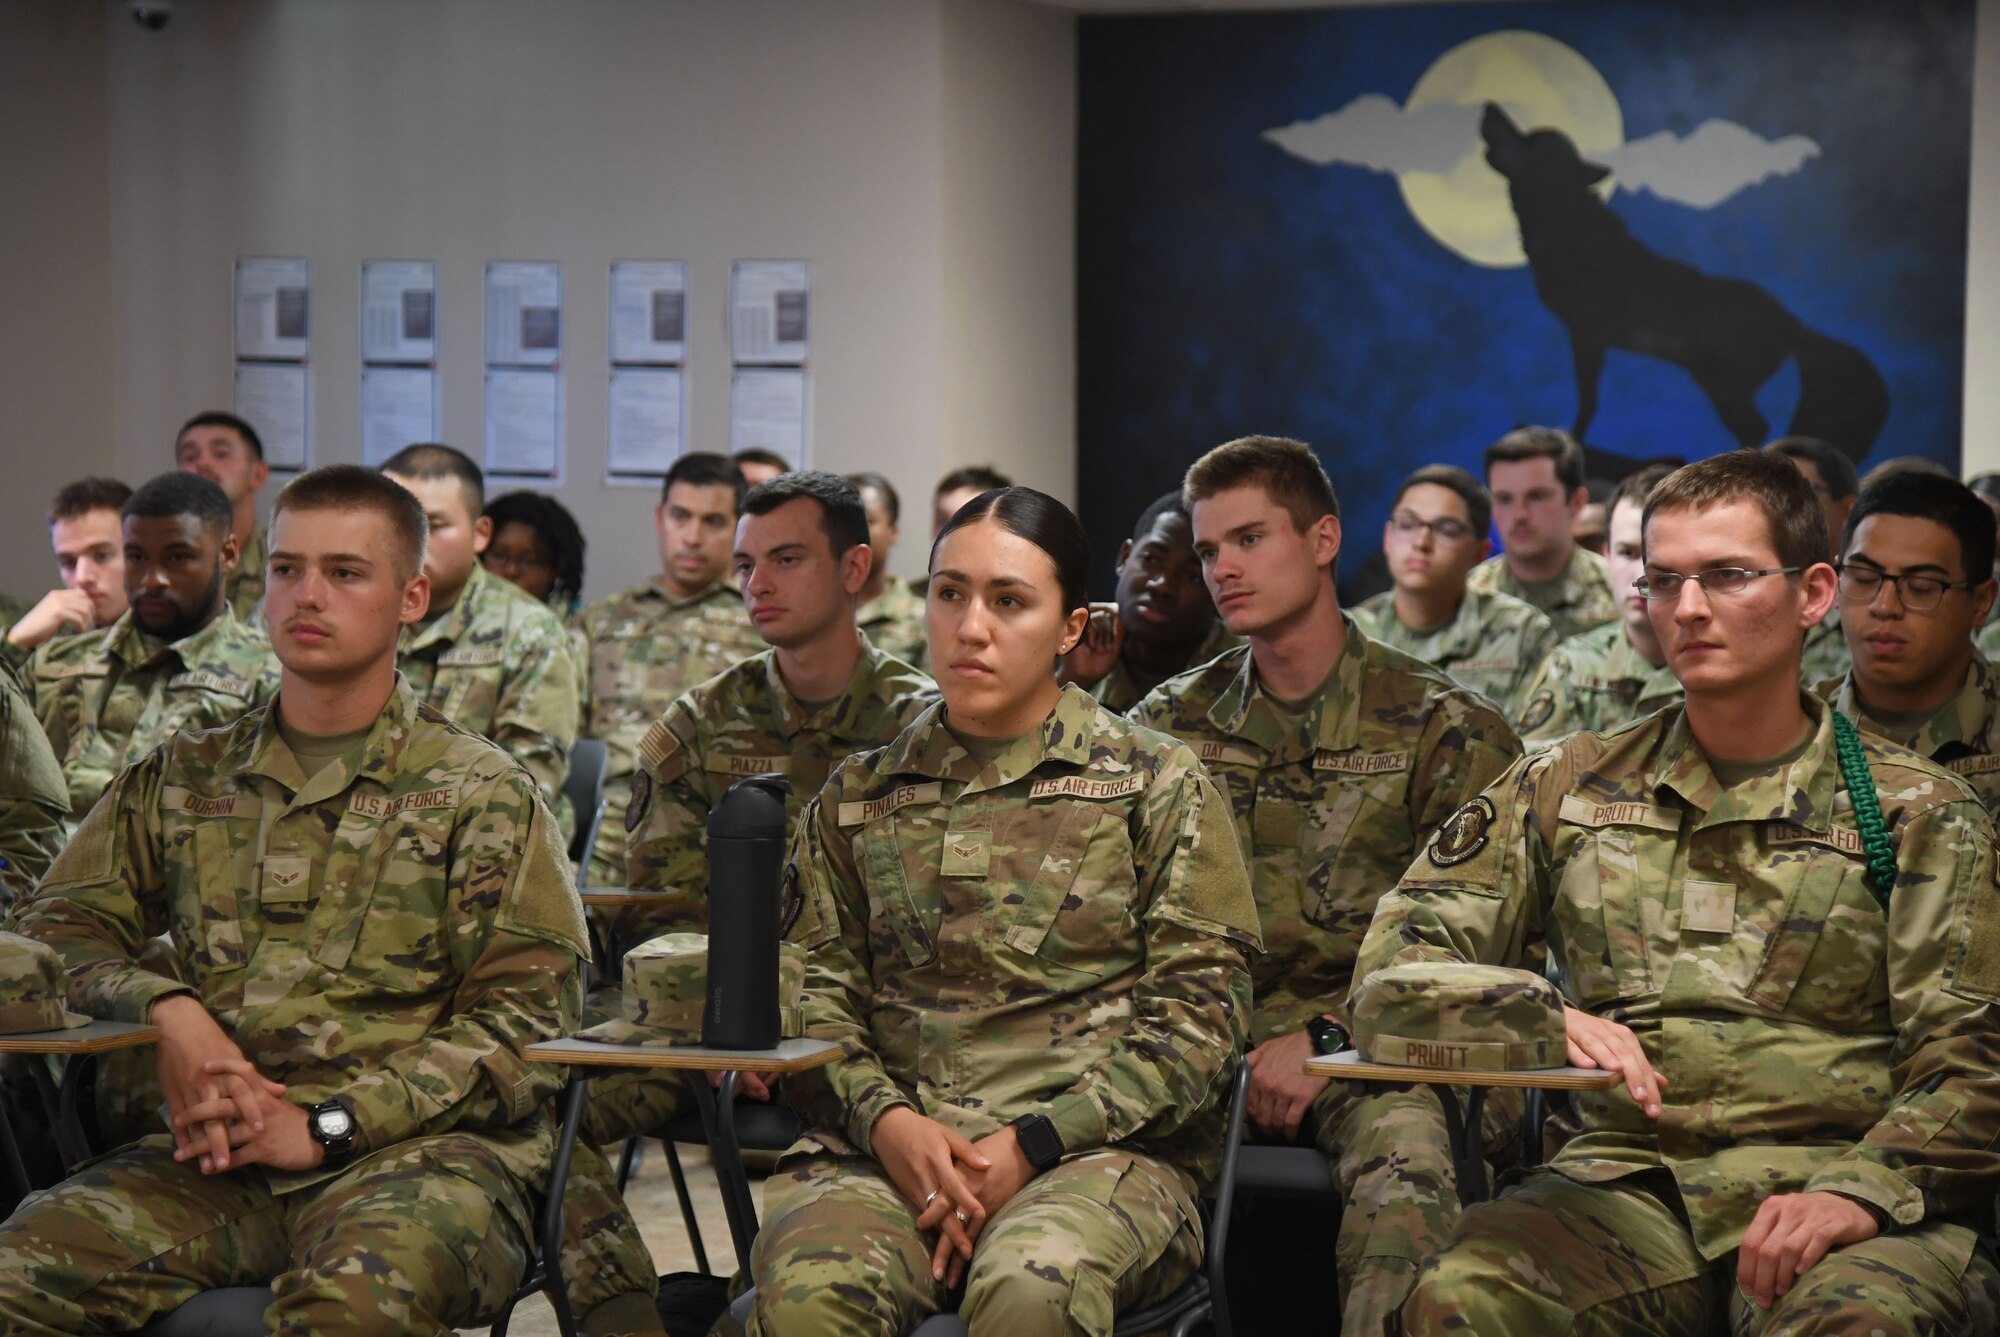 Students from the 336th Training Squadron attend an Air Force Wounded Warrior (AFW2) program briefing inside Holbrook Manor at Keesler Air Force Base, Mississippi, June 7, 2022. The AFW2 program provides concentrated non-medical care and support for combat wounded, ill and injured Airmen and their families as they recover and transition back to duty or into civilian life. (U.S. Air Force photo by Kemberly Groue)